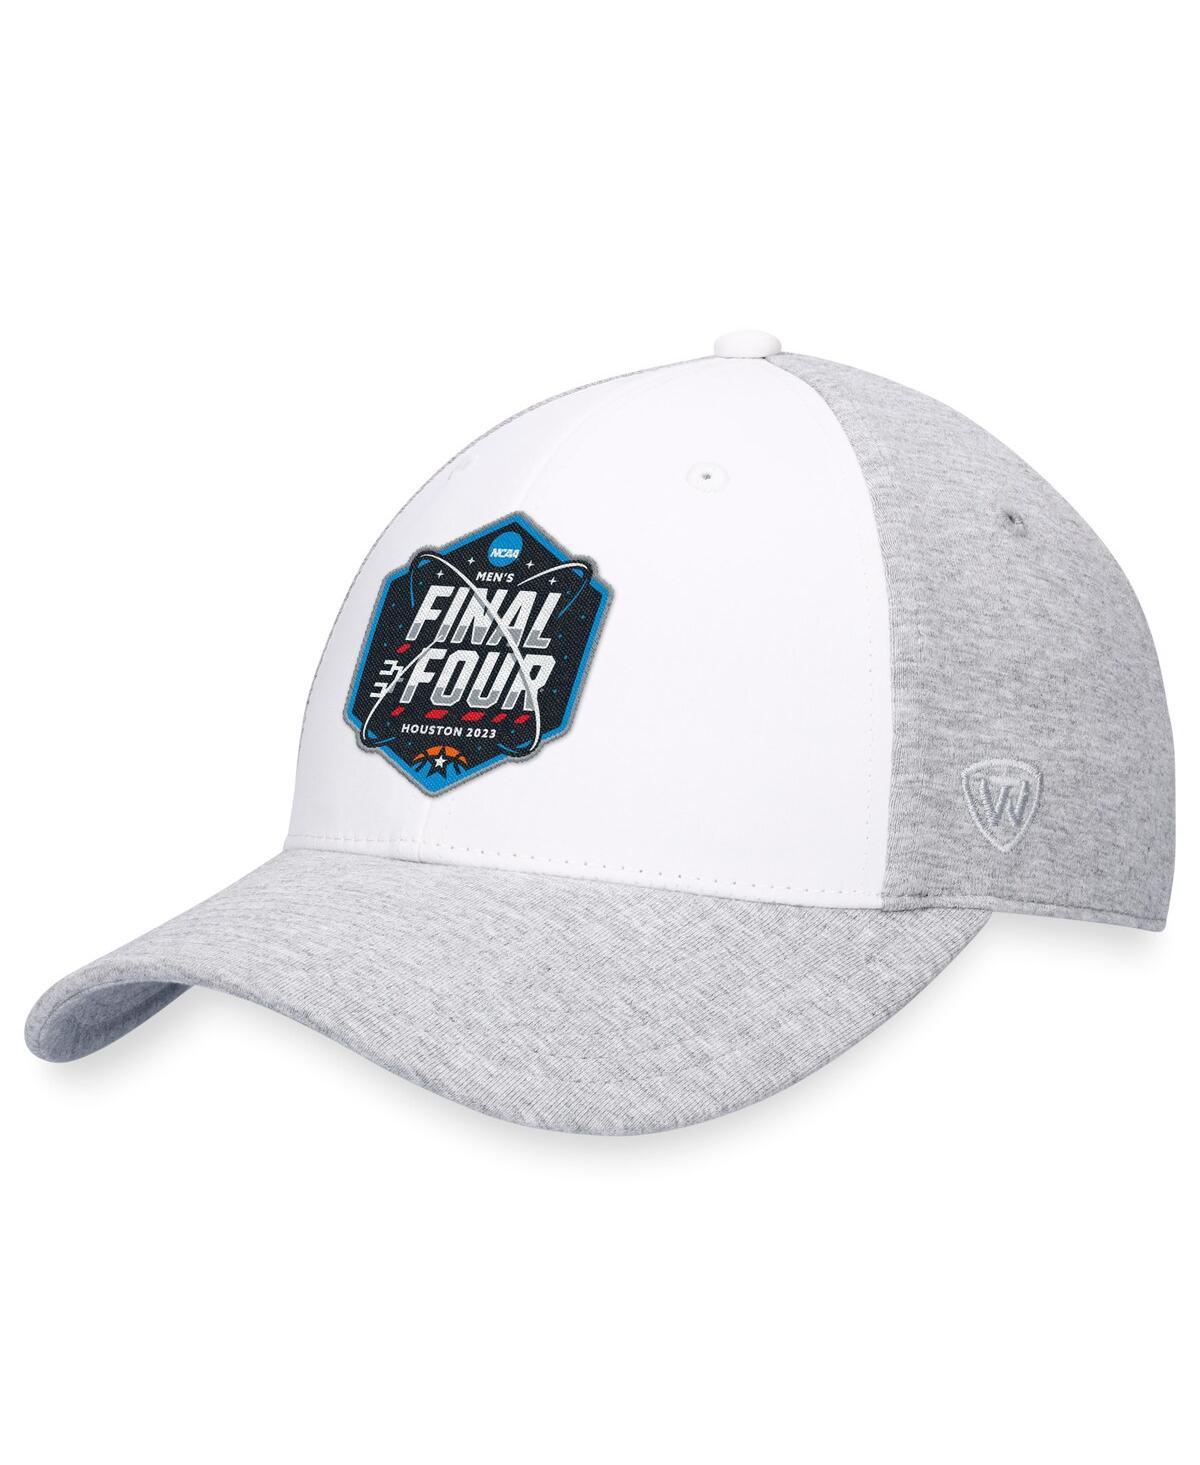 Top Of The World White 2023 Ncaa Men's Basketball Tournament March Madness Adjustable Hat